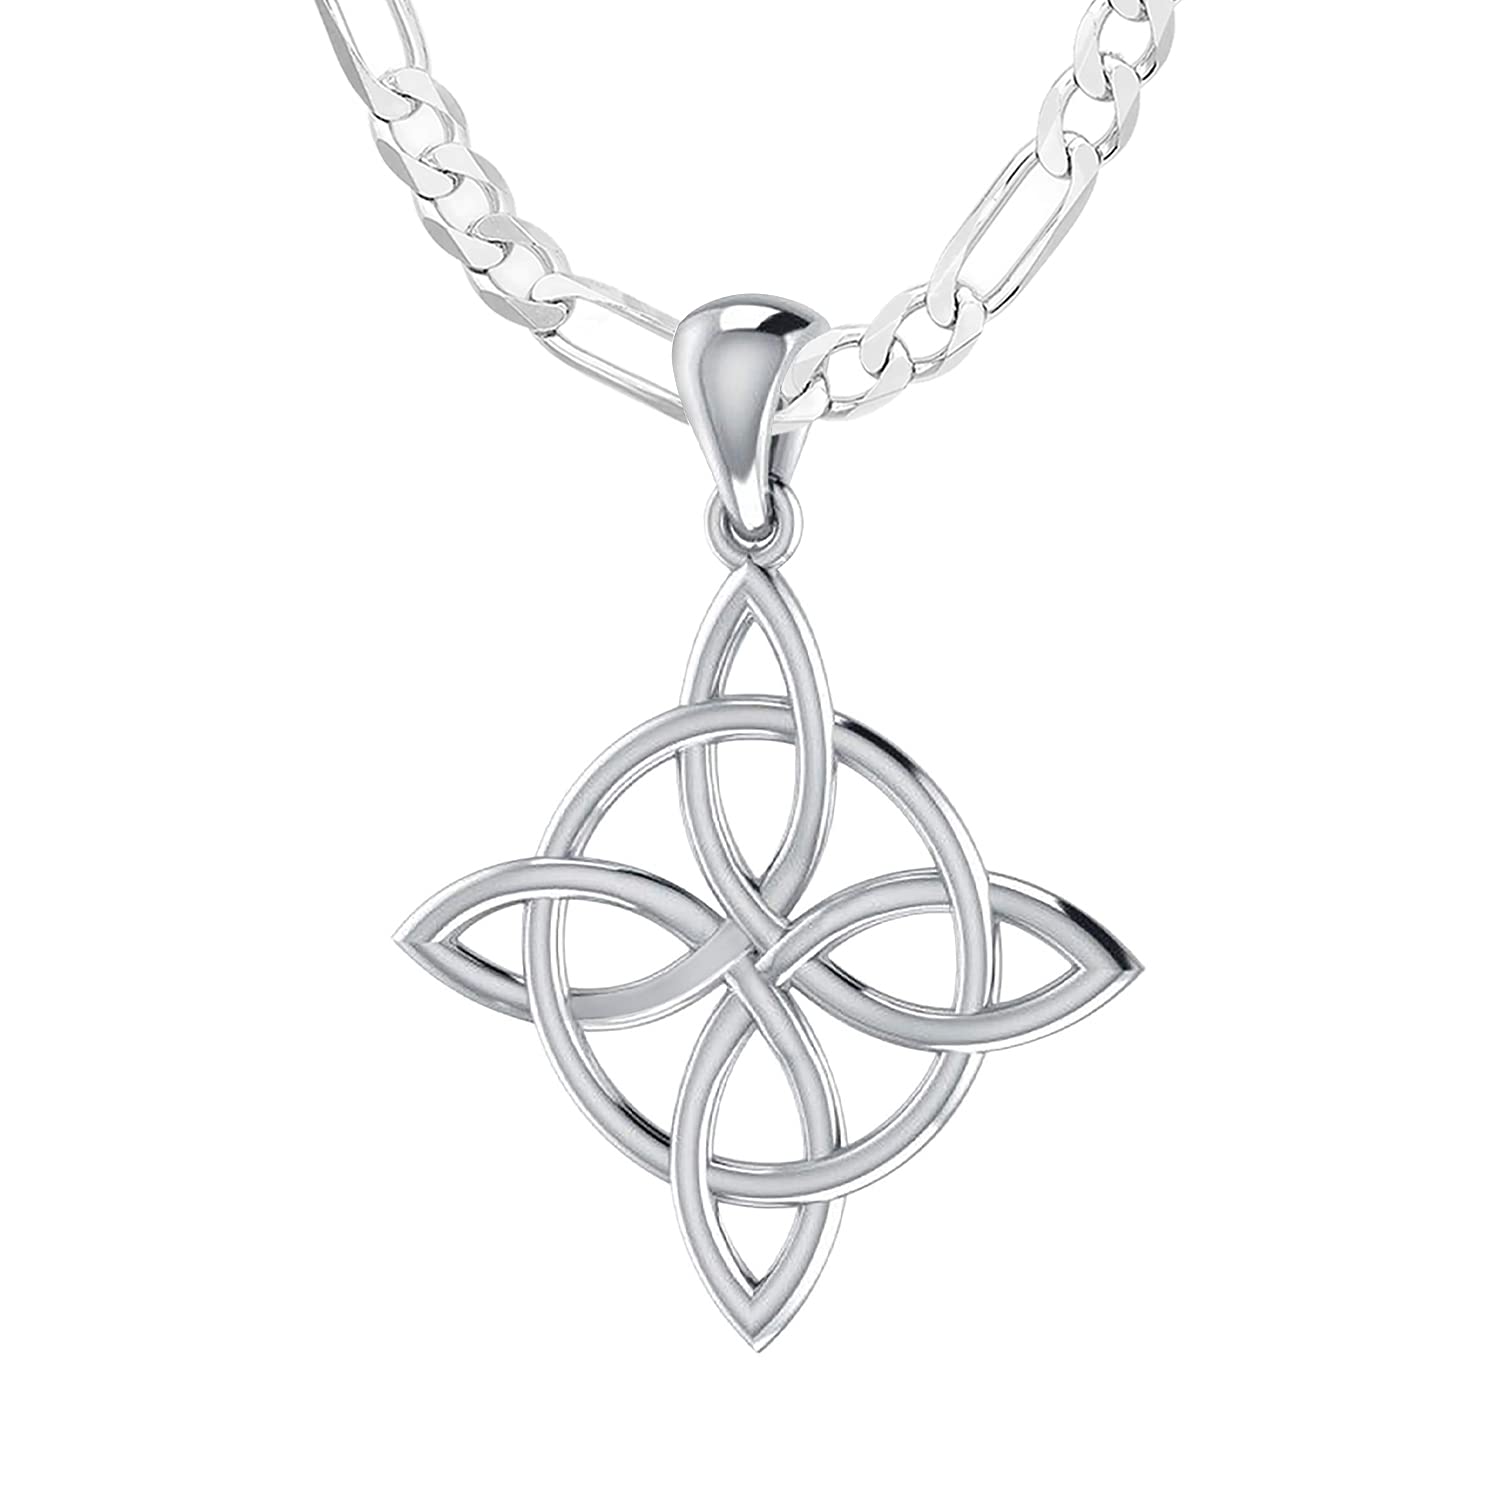 1 1/8in 925 Sterling Silver Irish Celtic Quaternary Knot Pendant Necklace - US Jewels